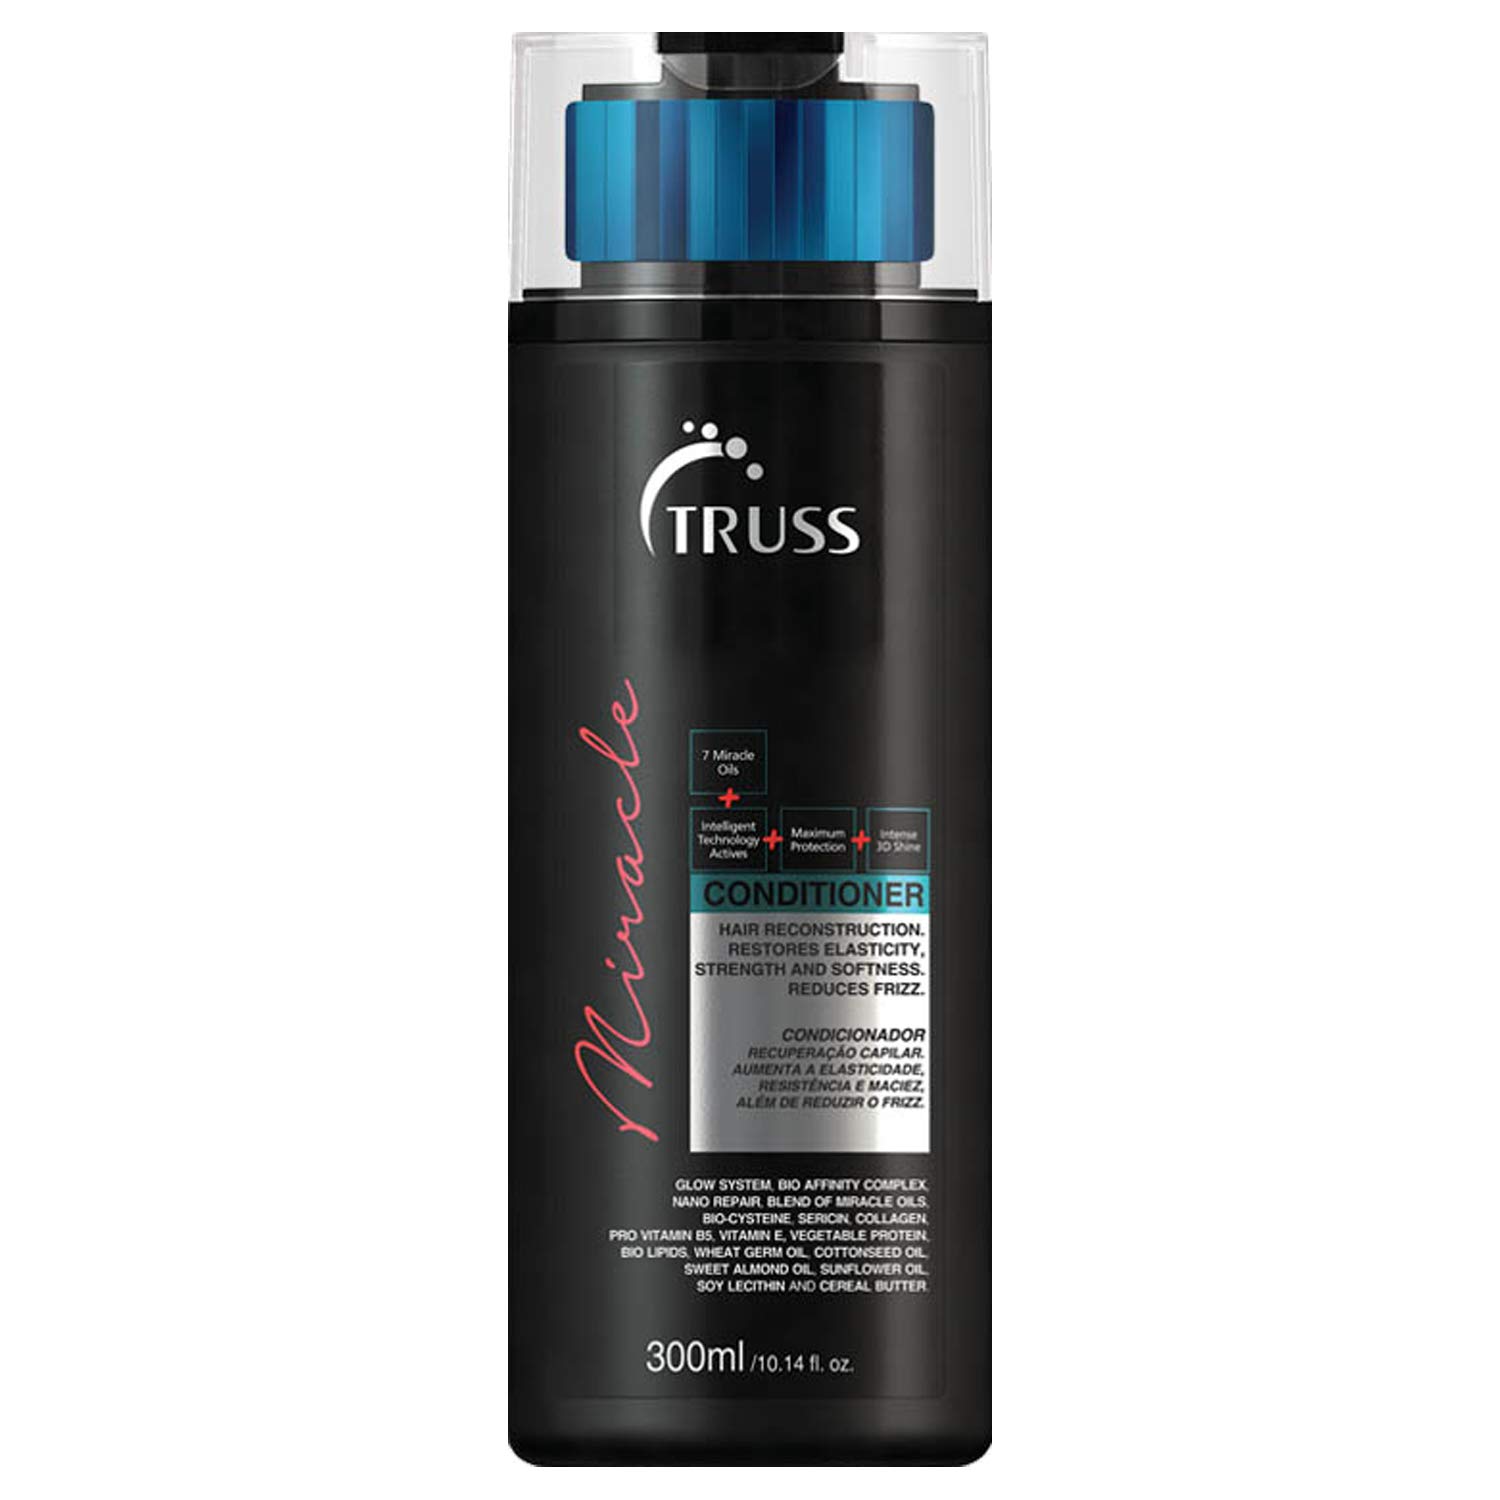 TRUSS Miracle Conditioner - Anti-aging, Color Safe, Repair Conditioner with Amino Acids, Lipids to Increase Elasticity, Strengthen Hair, Adds Shine, Frizz Control,  Repairs Chemical Damaged Dry Hair